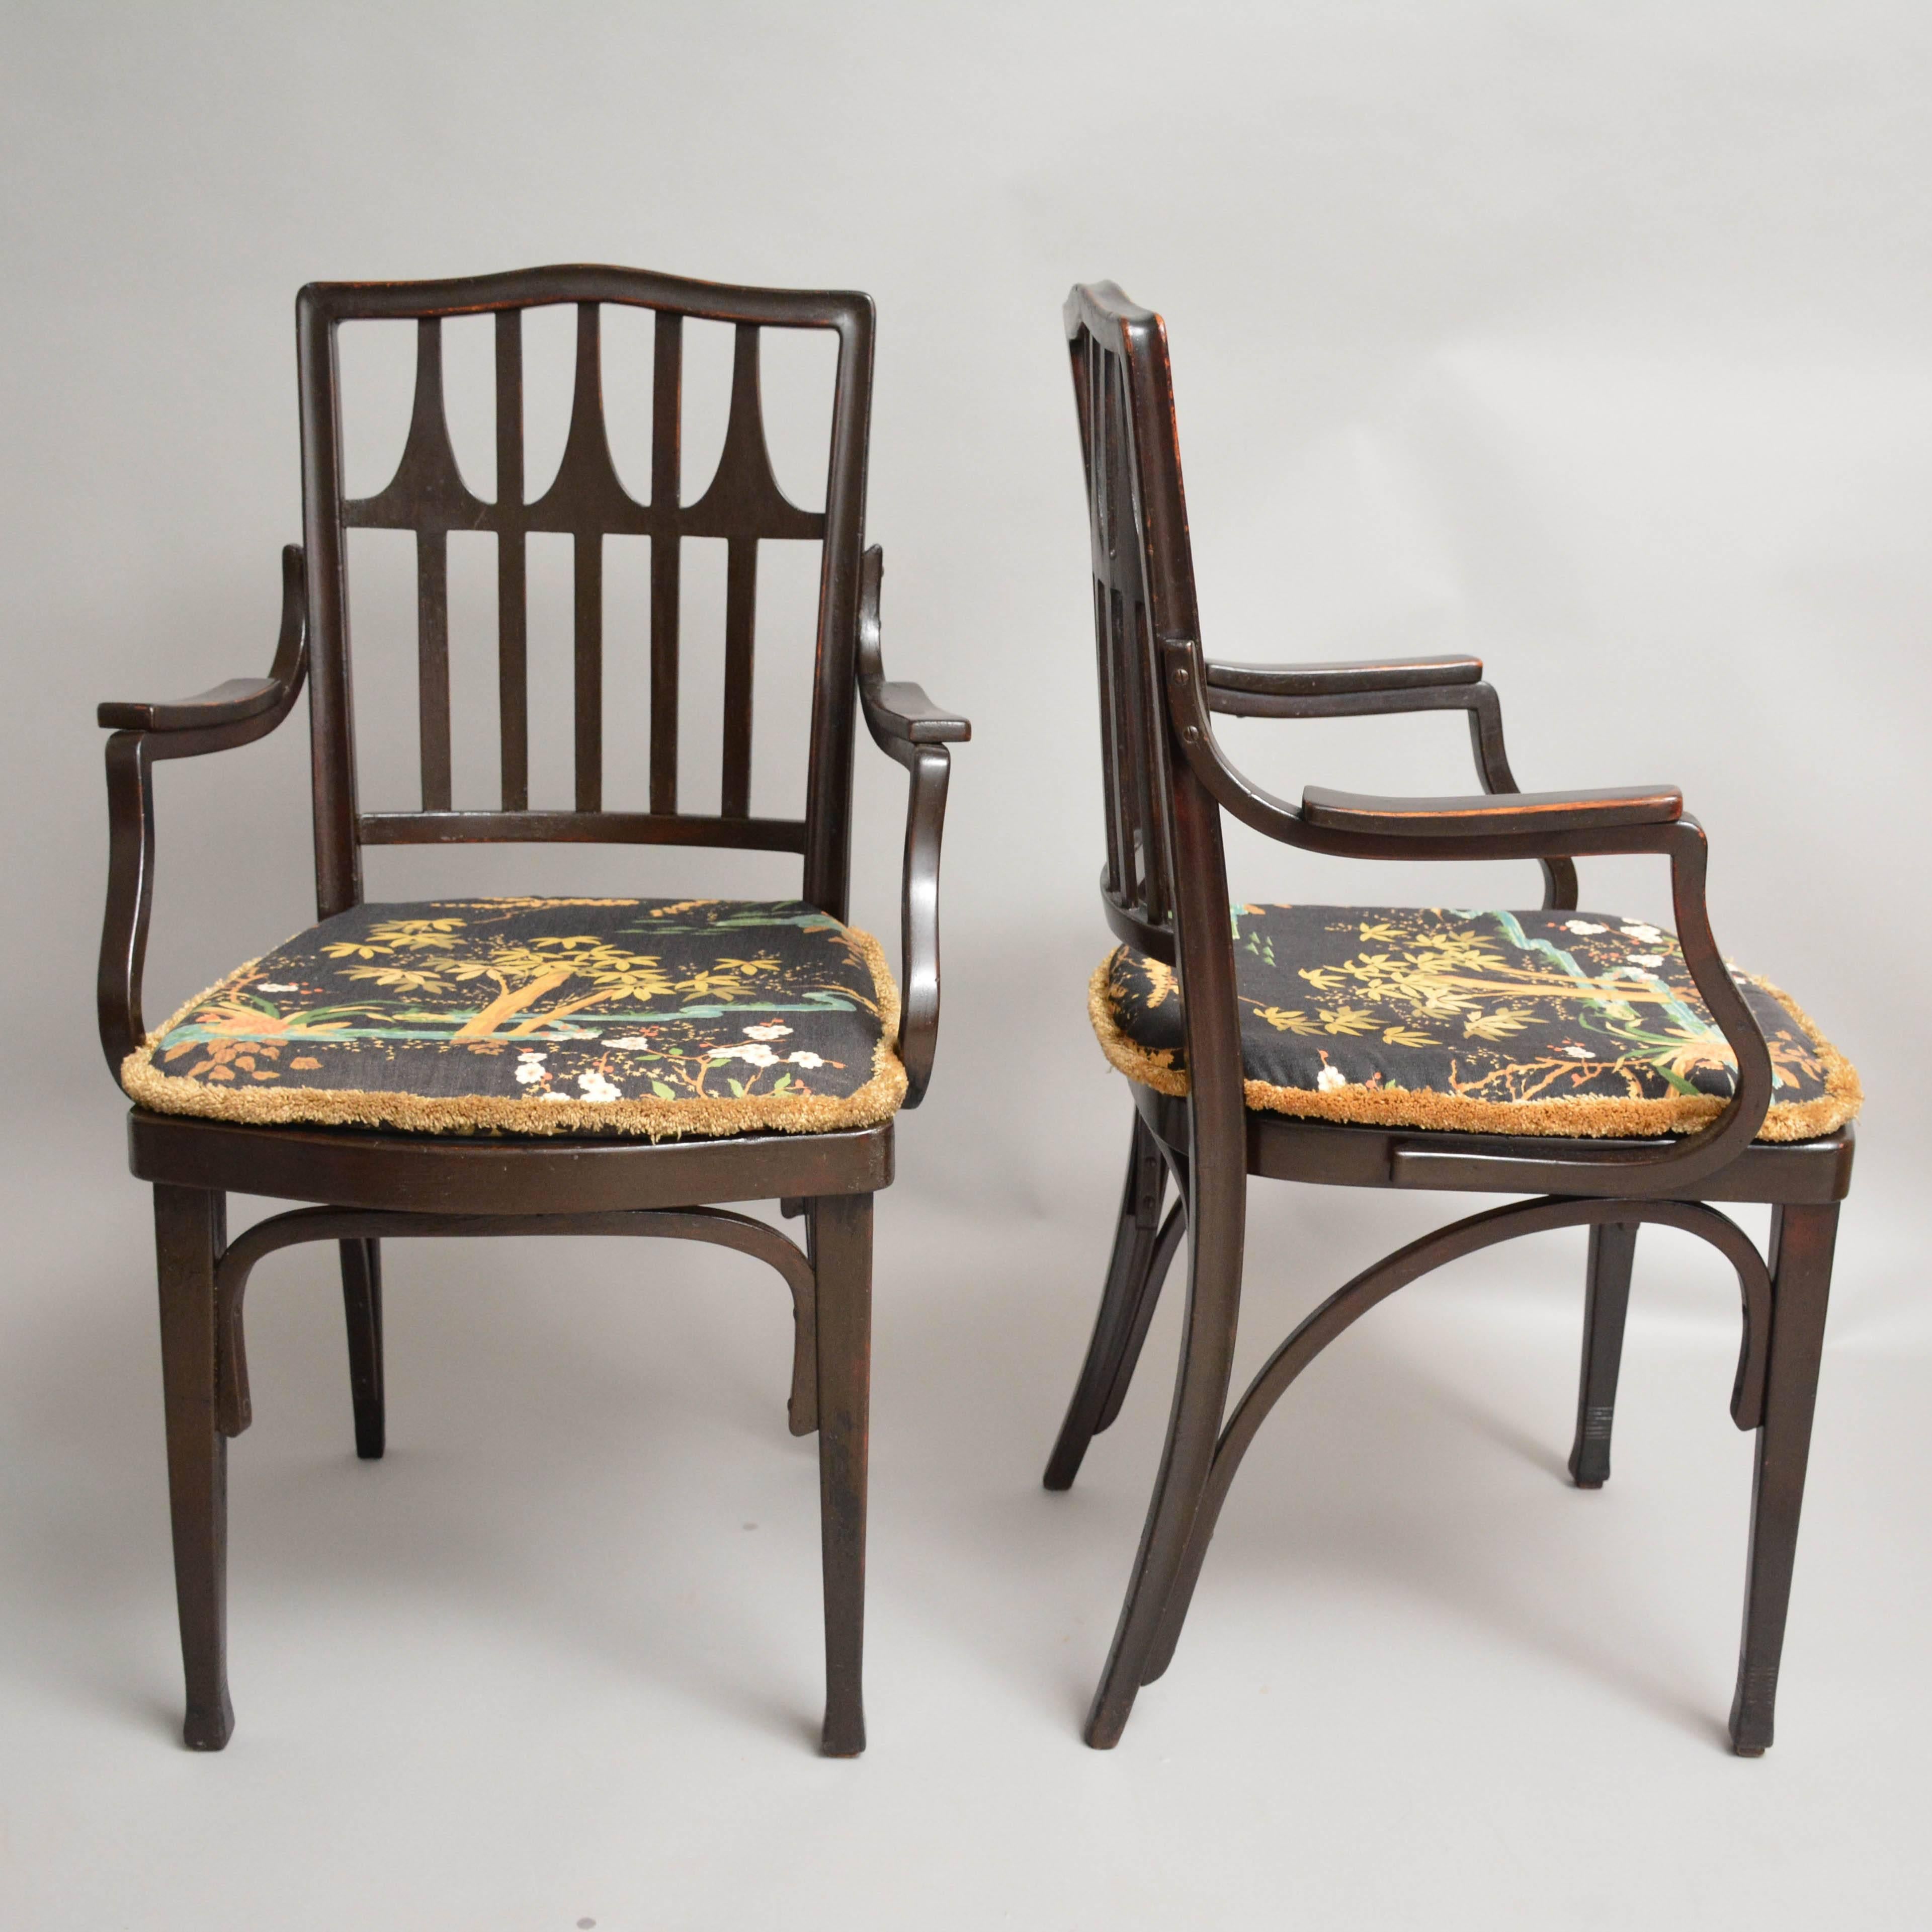 A pair of armchairs designed by Gustav Siegel. Manufactured by Jacob & Josef Kohn, Austria, 1905-1910. The seat cushion upholstered in Japanese pattern. The chairs is made of acajou stained wood.